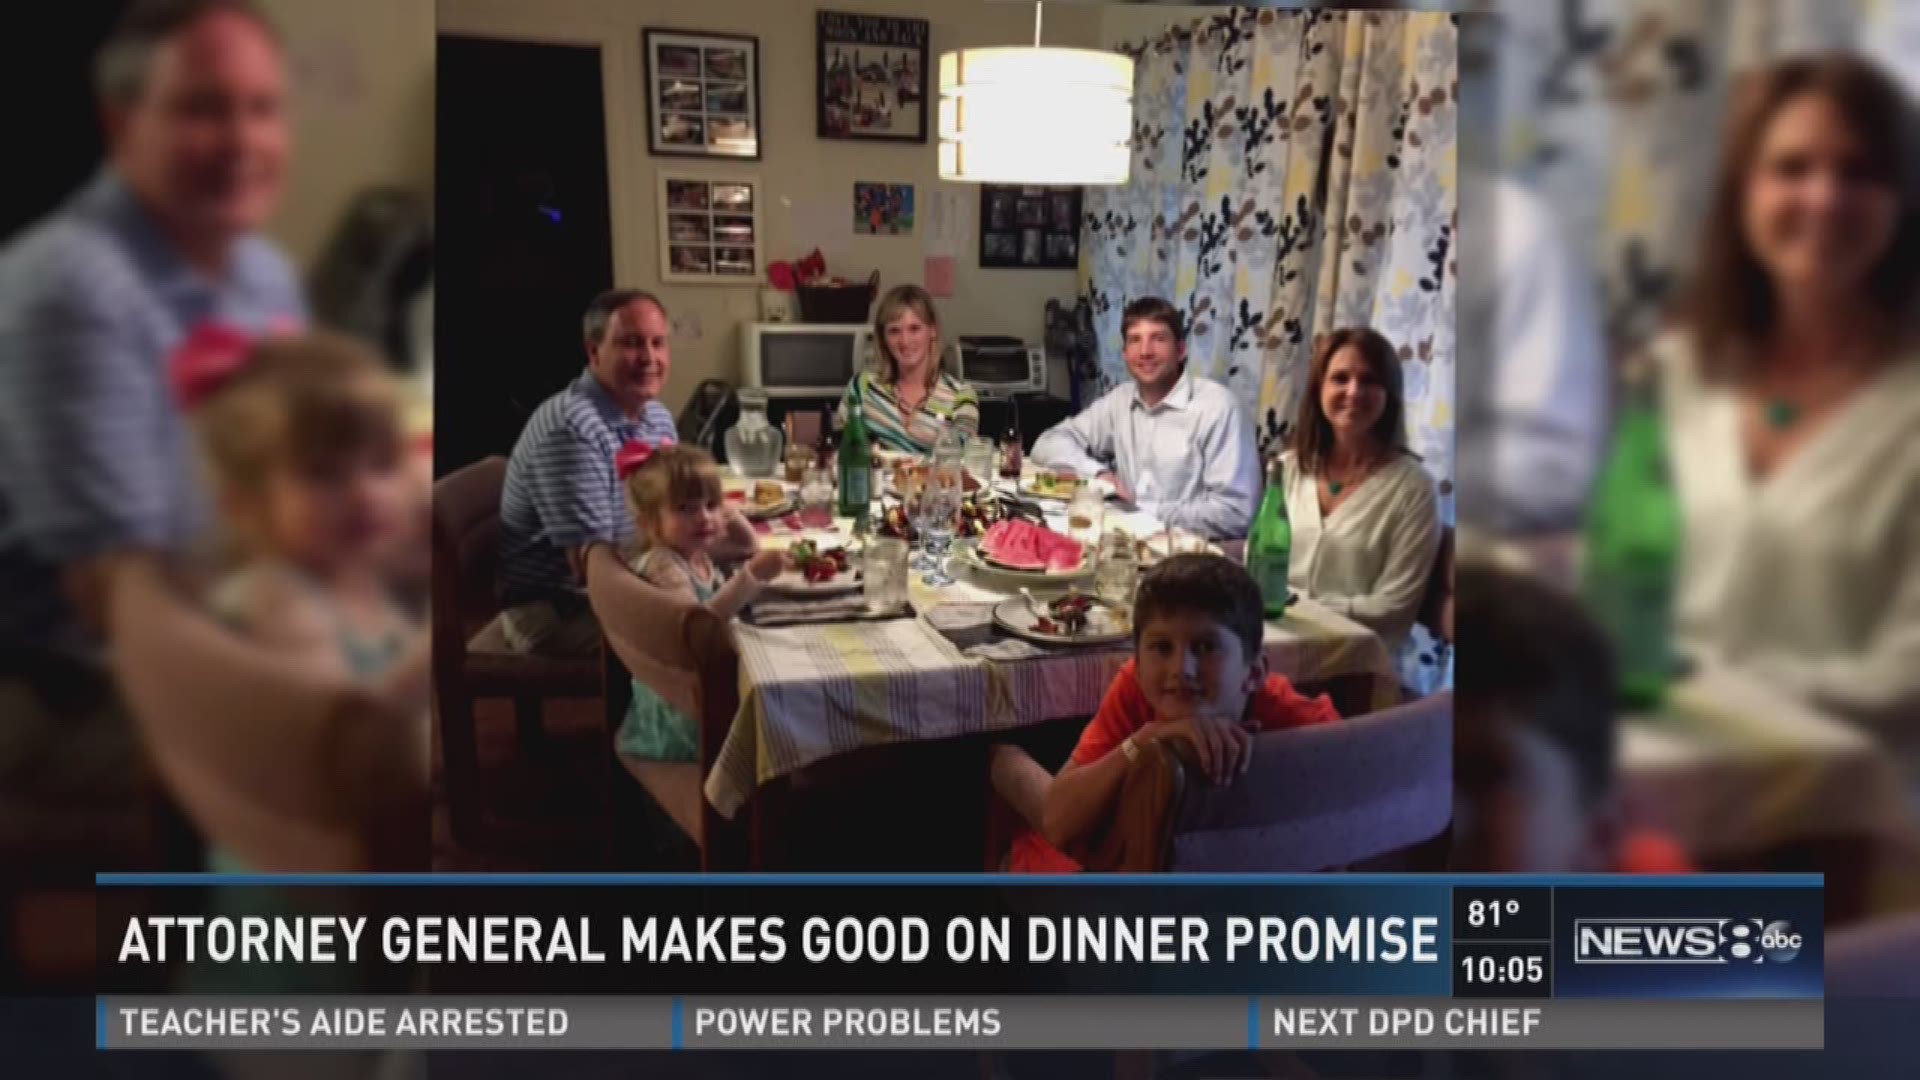 Attorney General makes good on dinner promise